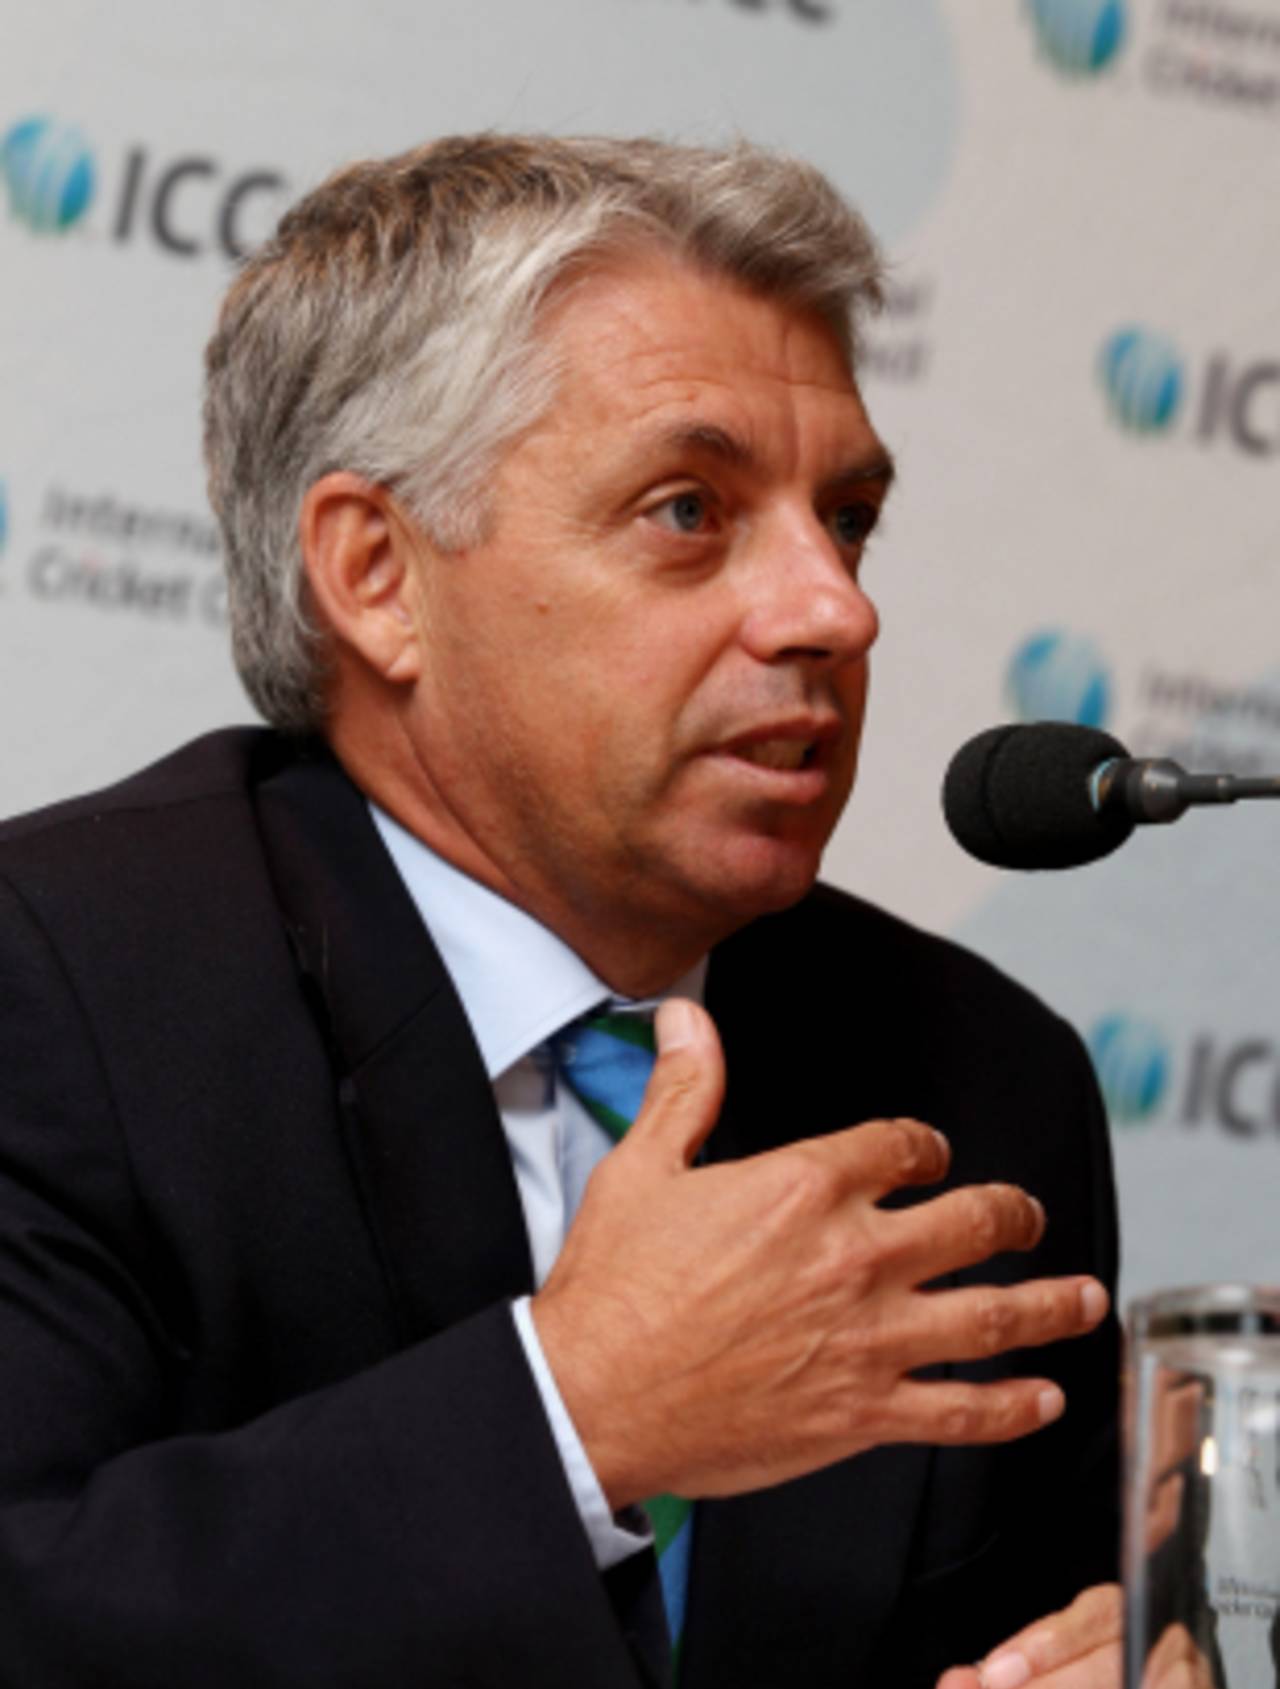 Dave Richardson, ICC's general manager of cricket, speaks after the Cricket Committee's meeting at Lord's, May 11 2011